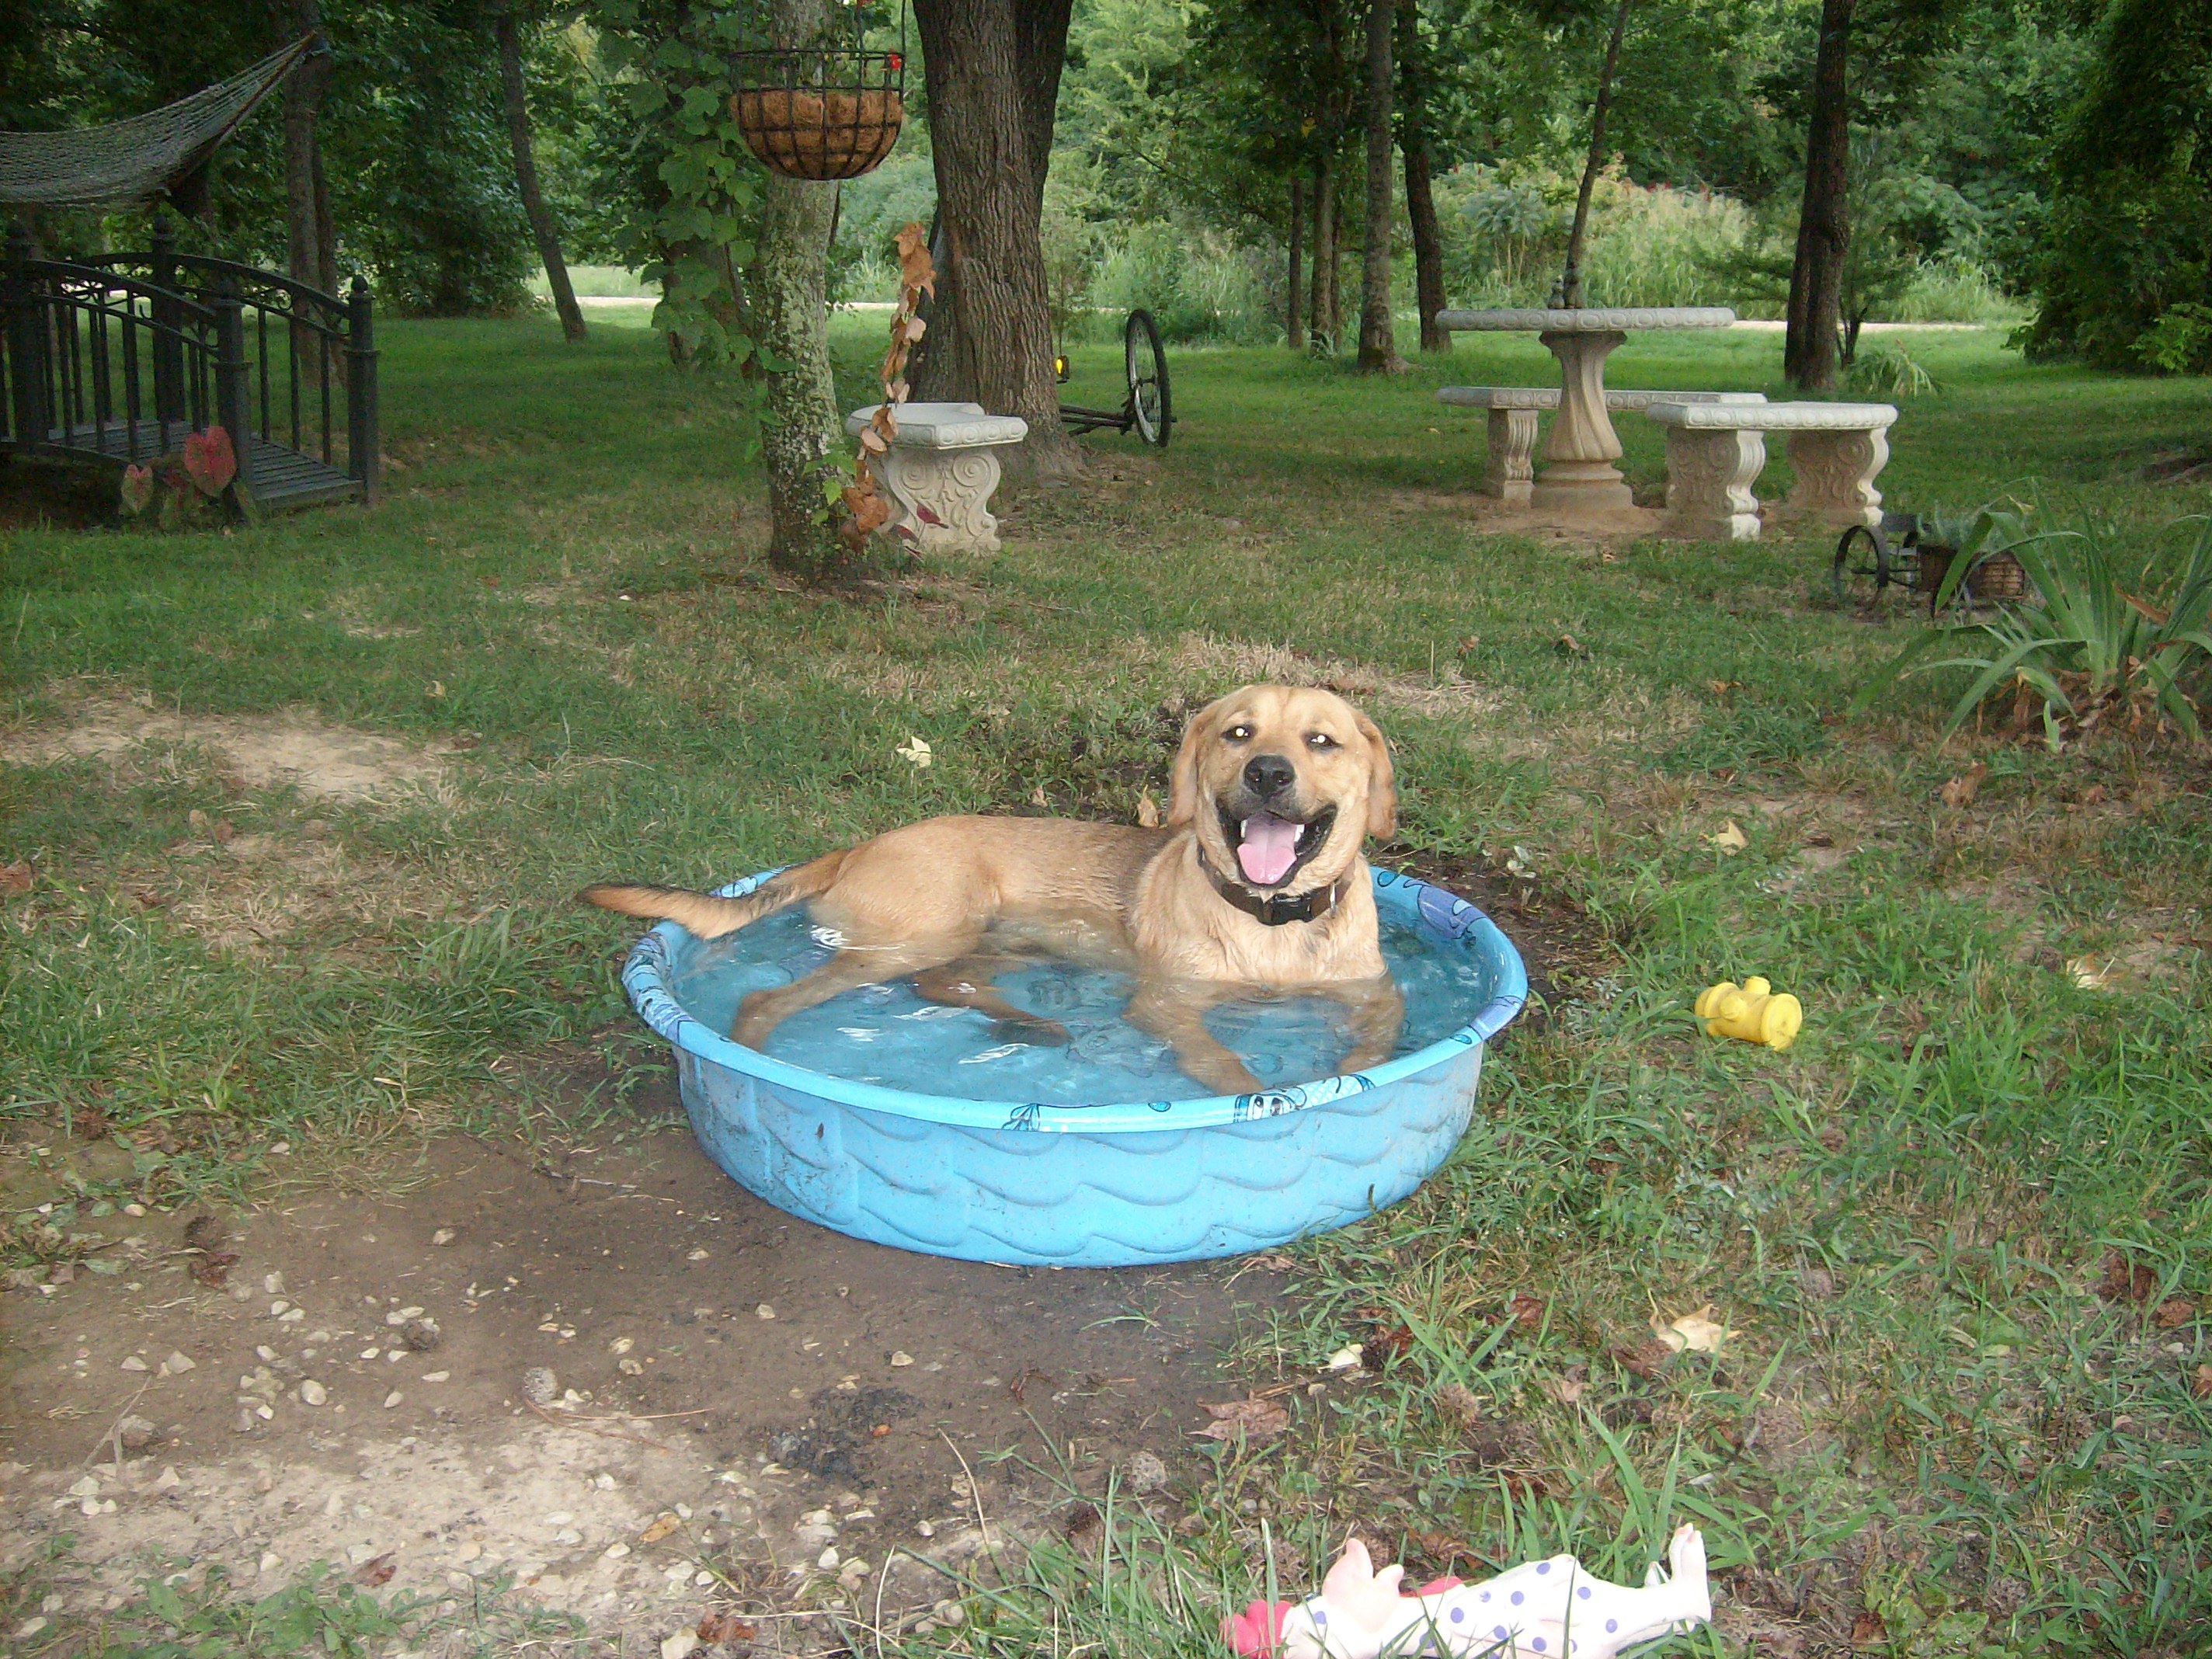 The live in neighbor dog cooling off in the pool normally used for everyones drinking water.